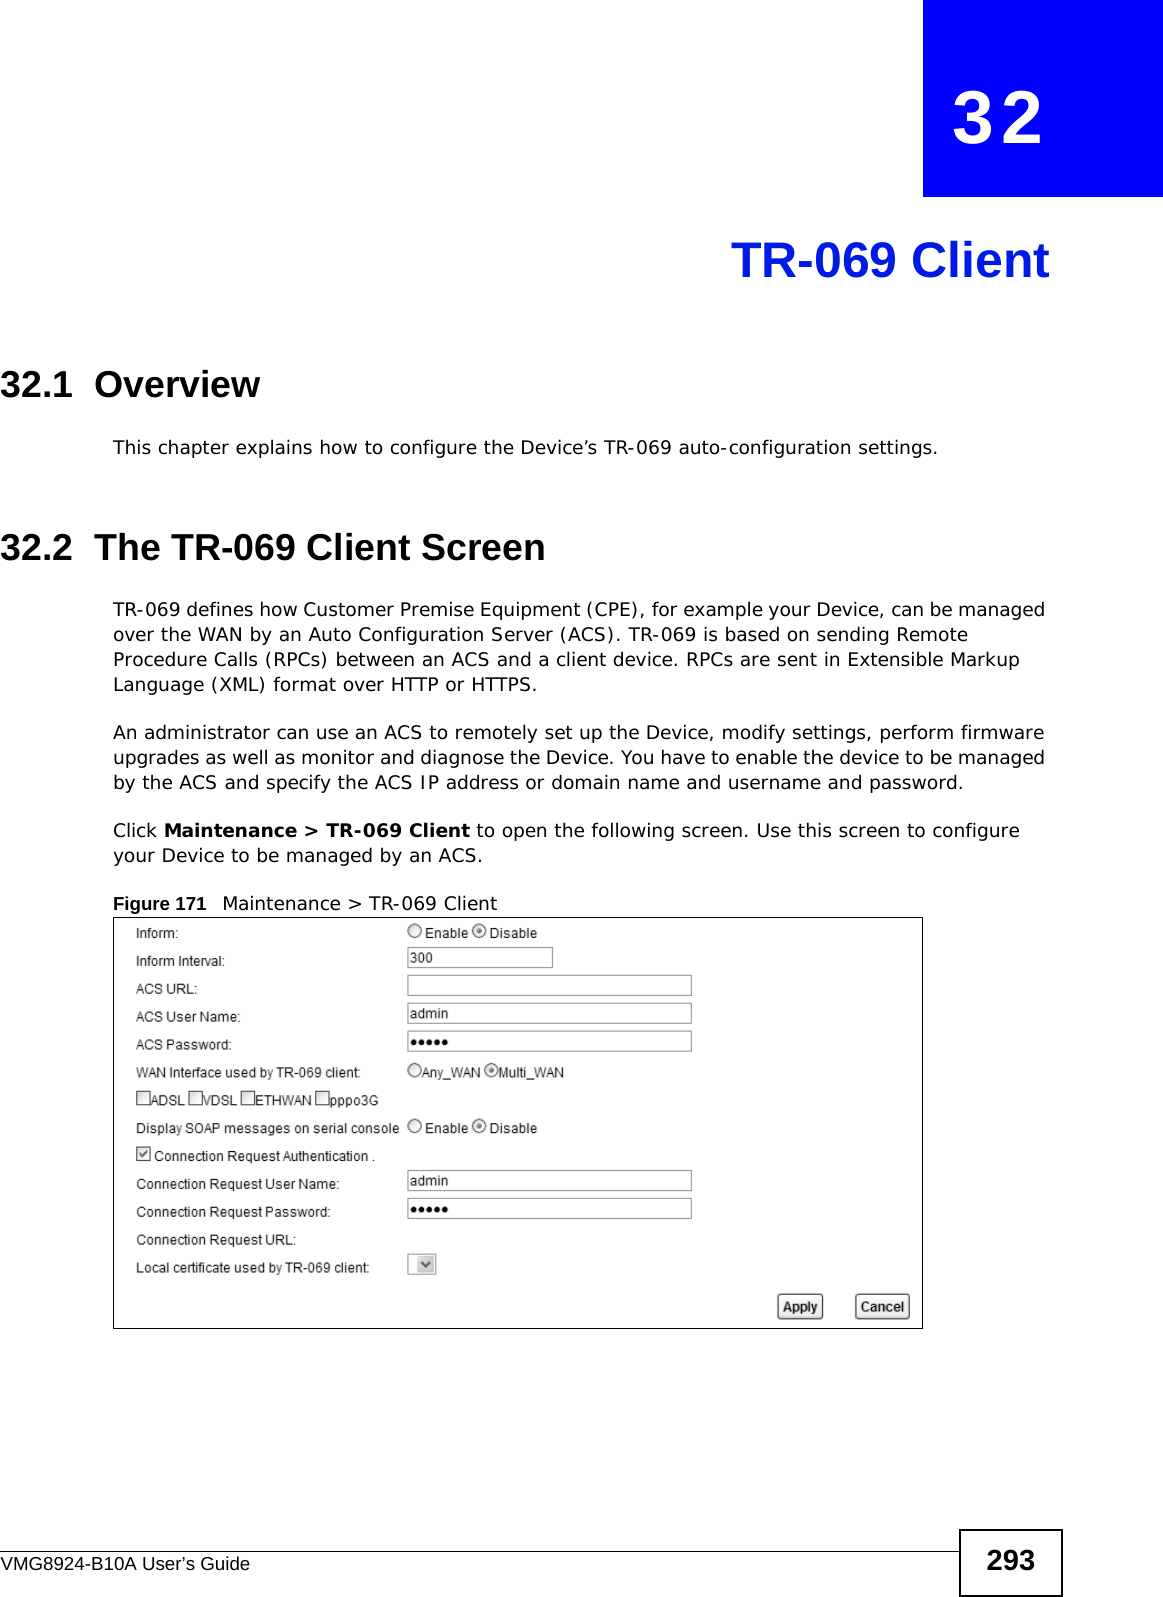 VMG8924-B10A User’s Guide 293CHAPTER   32TR-069 Client32.1  OverviewThis chapter explains how to configure the Device’s TR-069 auto-configuration settings.32.2  The TR-069 Client ScreenTR-069 defines how Customer Premise Equipment (CPE), for example your Device, can be managed over the WAN by an Auto Configuration Server (ACS). TR-069 is based on sending Remote Procedure Calls (RPCs) between an ACS and a client device. RPCs are sent in Extensible Markup Language (XML) format over HTTP or HTTPS. An administrator can use an ACS to remotely set up the Device, modify settings, perform firmware upgrades as well as monitor and diagnose the Device. You have to enable the device to be managed by the ACS and specify the ACS IP address or domain name and username and password.Click Maintenance &gt; TR-069 Client to open the following screen. Use this screen to configure your Device to be managed by an ACS. Figure 171   Maintenance &gt; TR-069 Client 